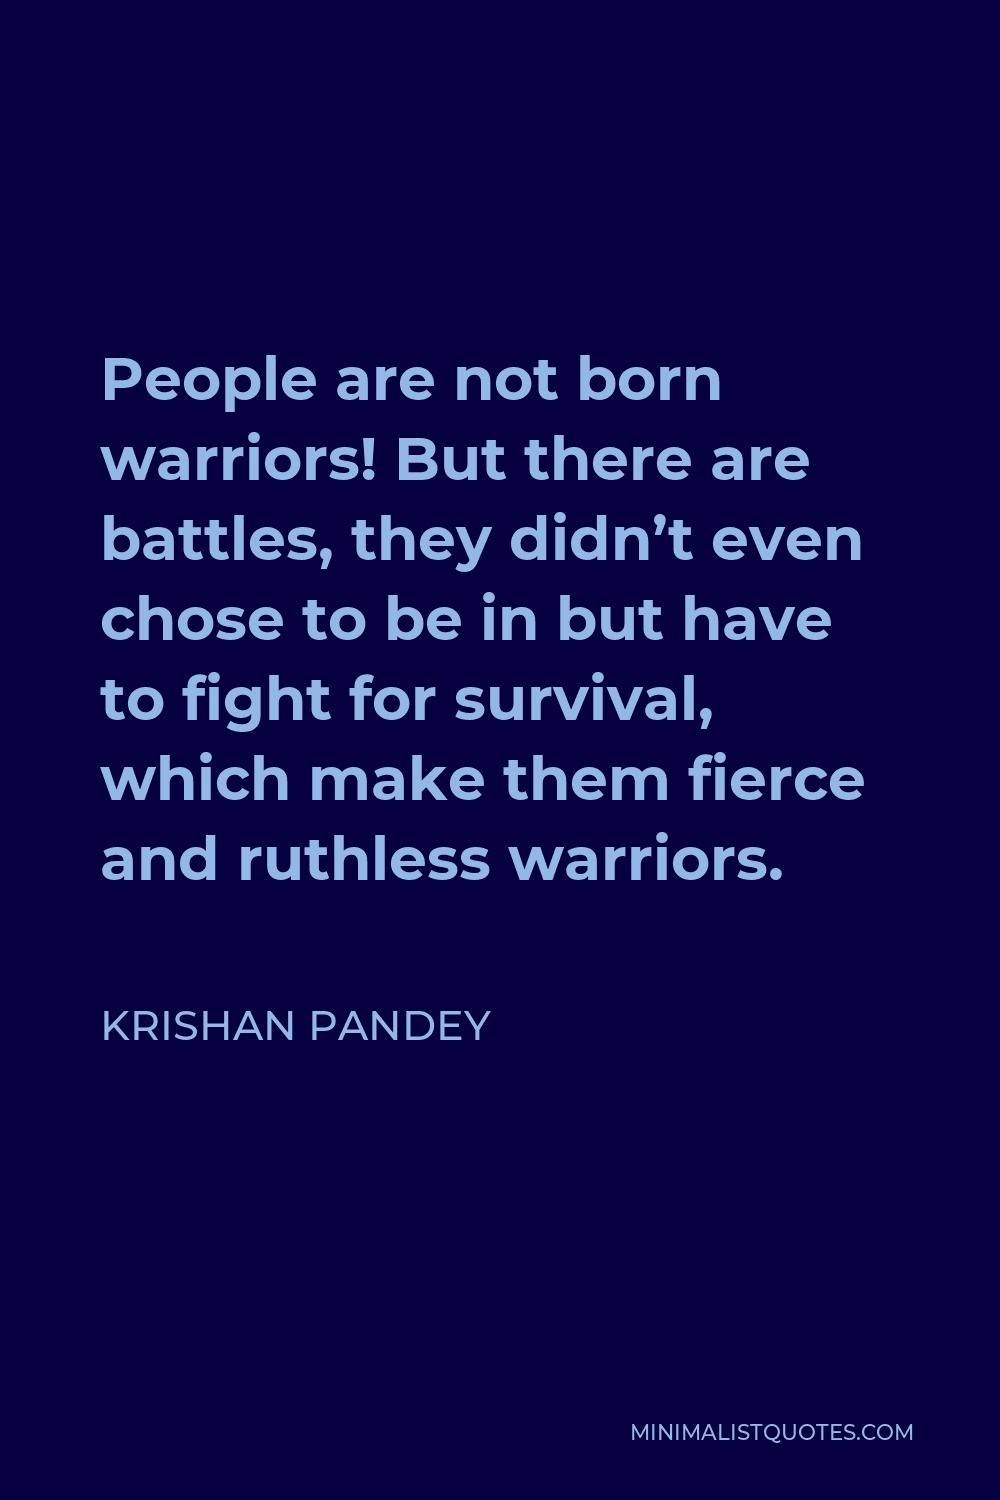 Krishan Pandey Quote - People are not born warriors! But there are battles, they didn’t even chose to be in but have to fight for survival, which make them fierce and ruthless warriors.